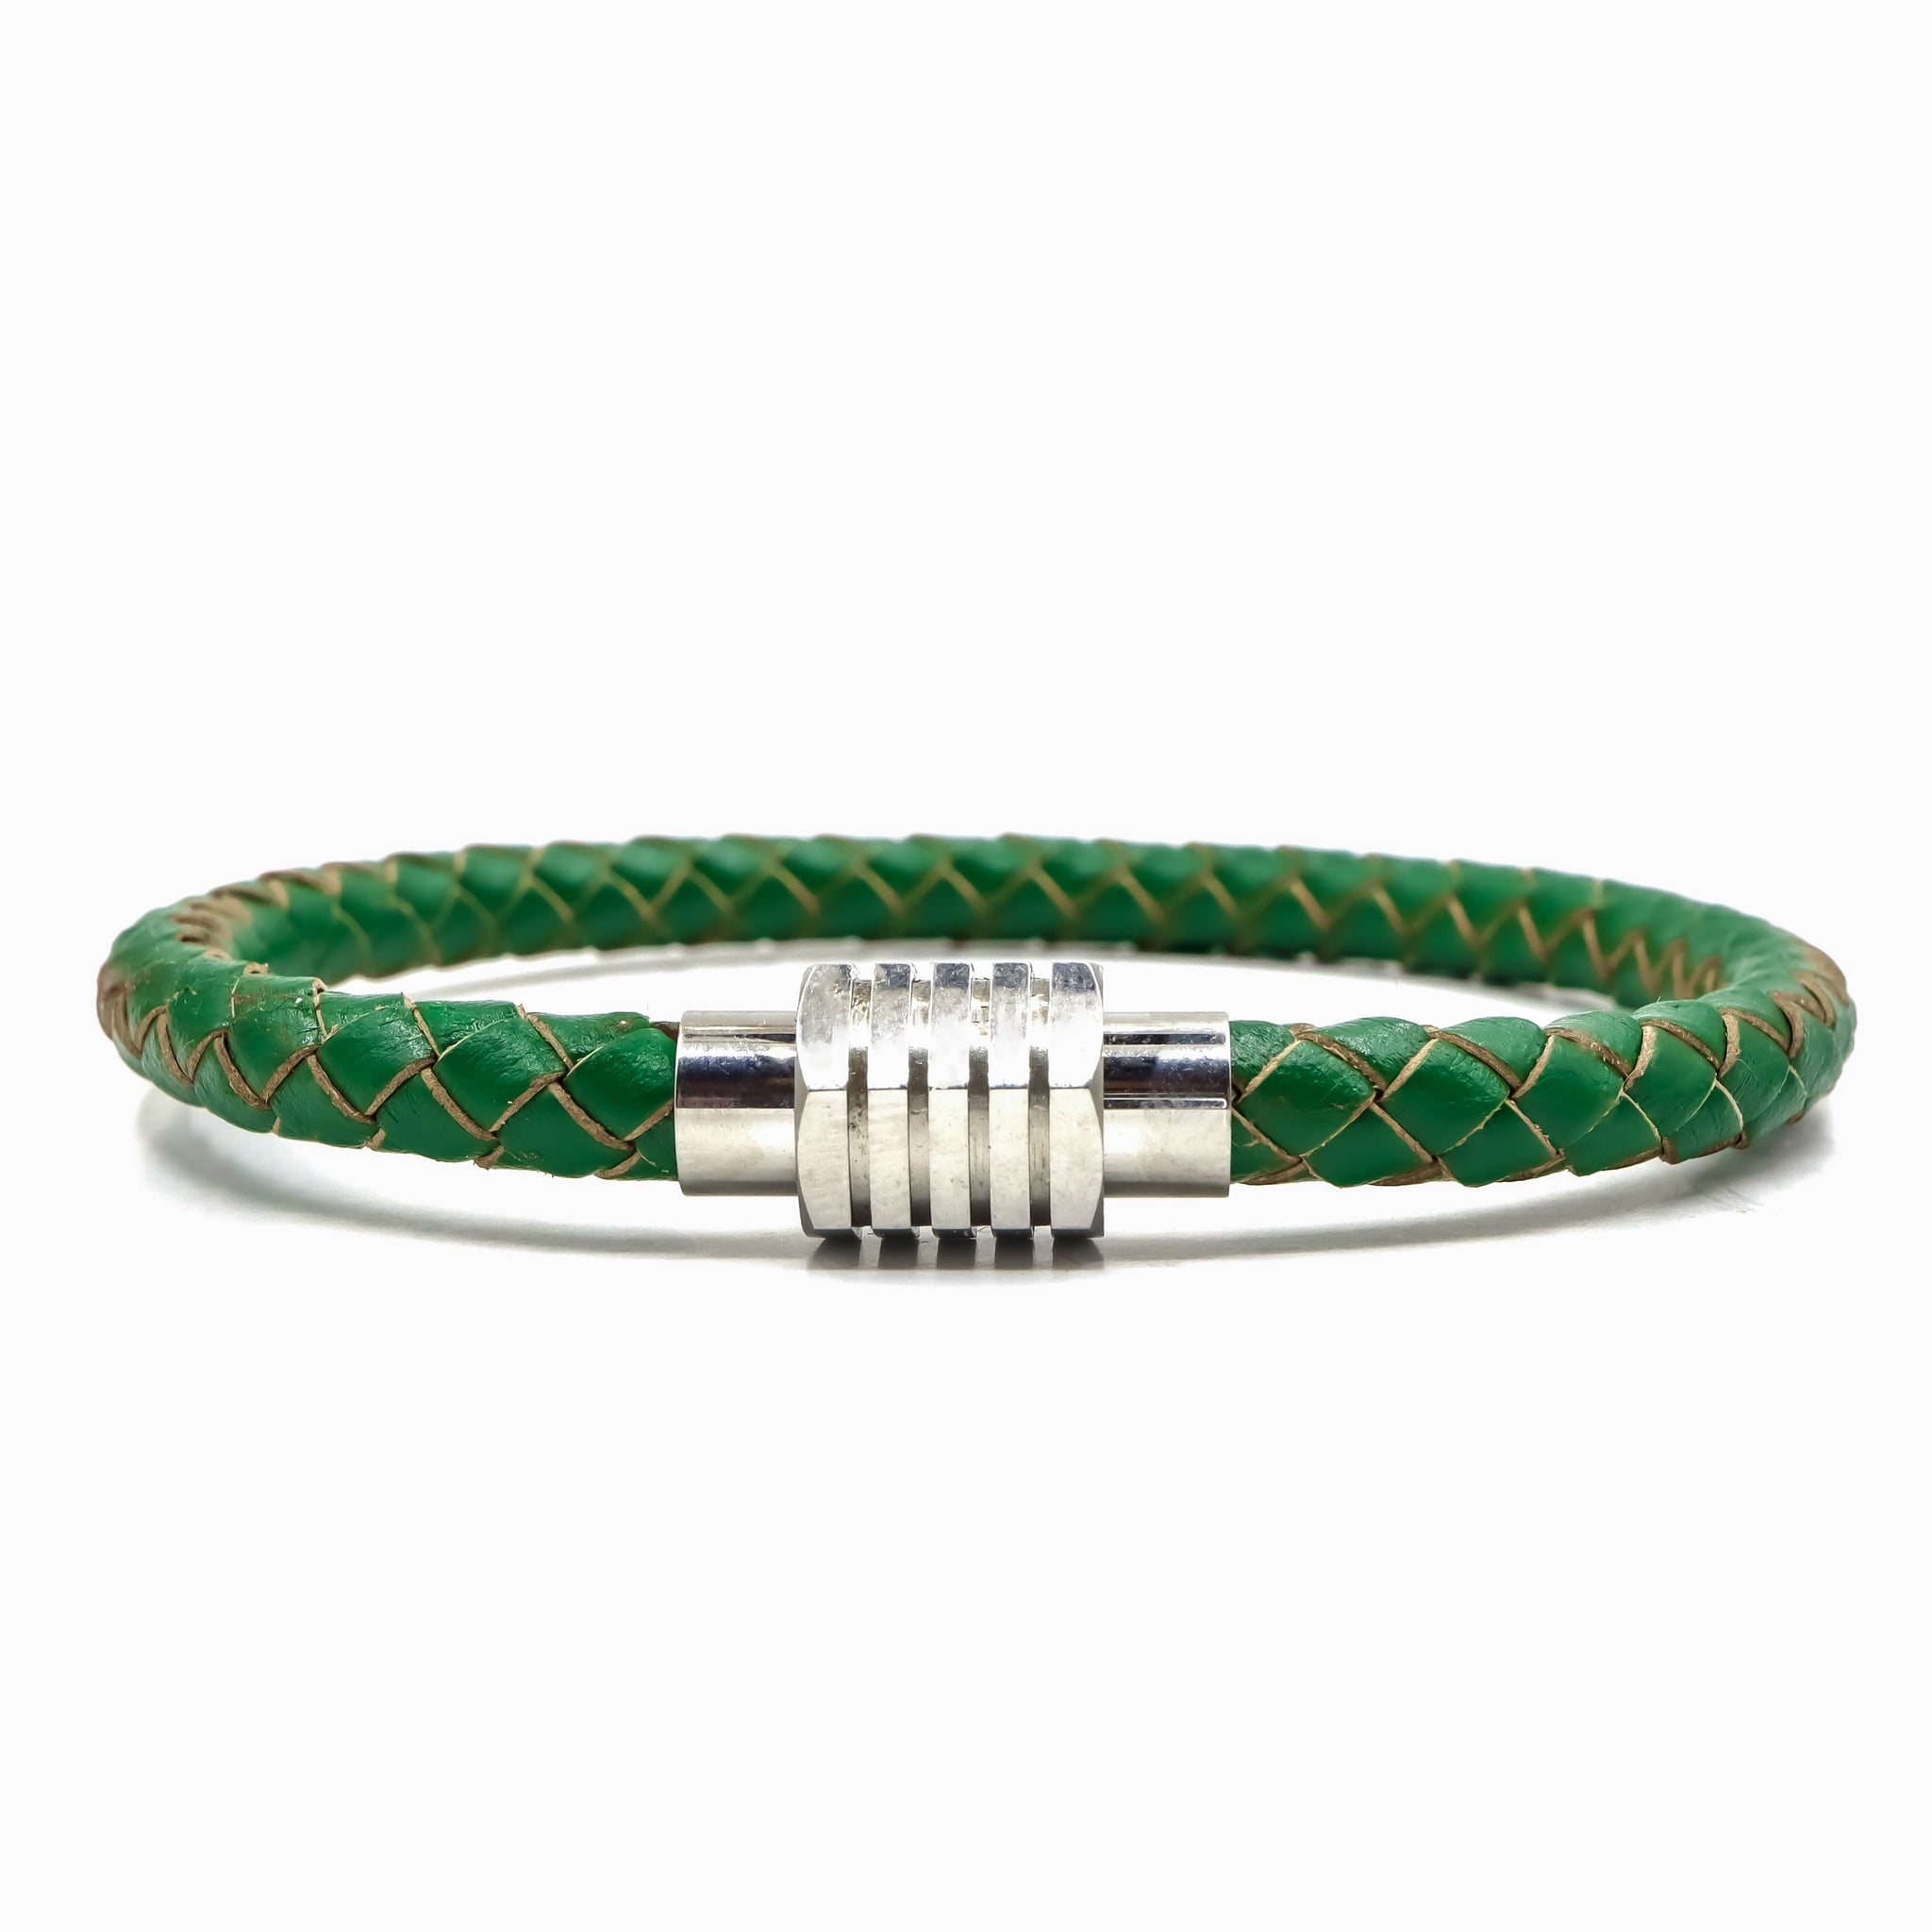 Green Leather and Silver Stainless Steel Men's Bracelet